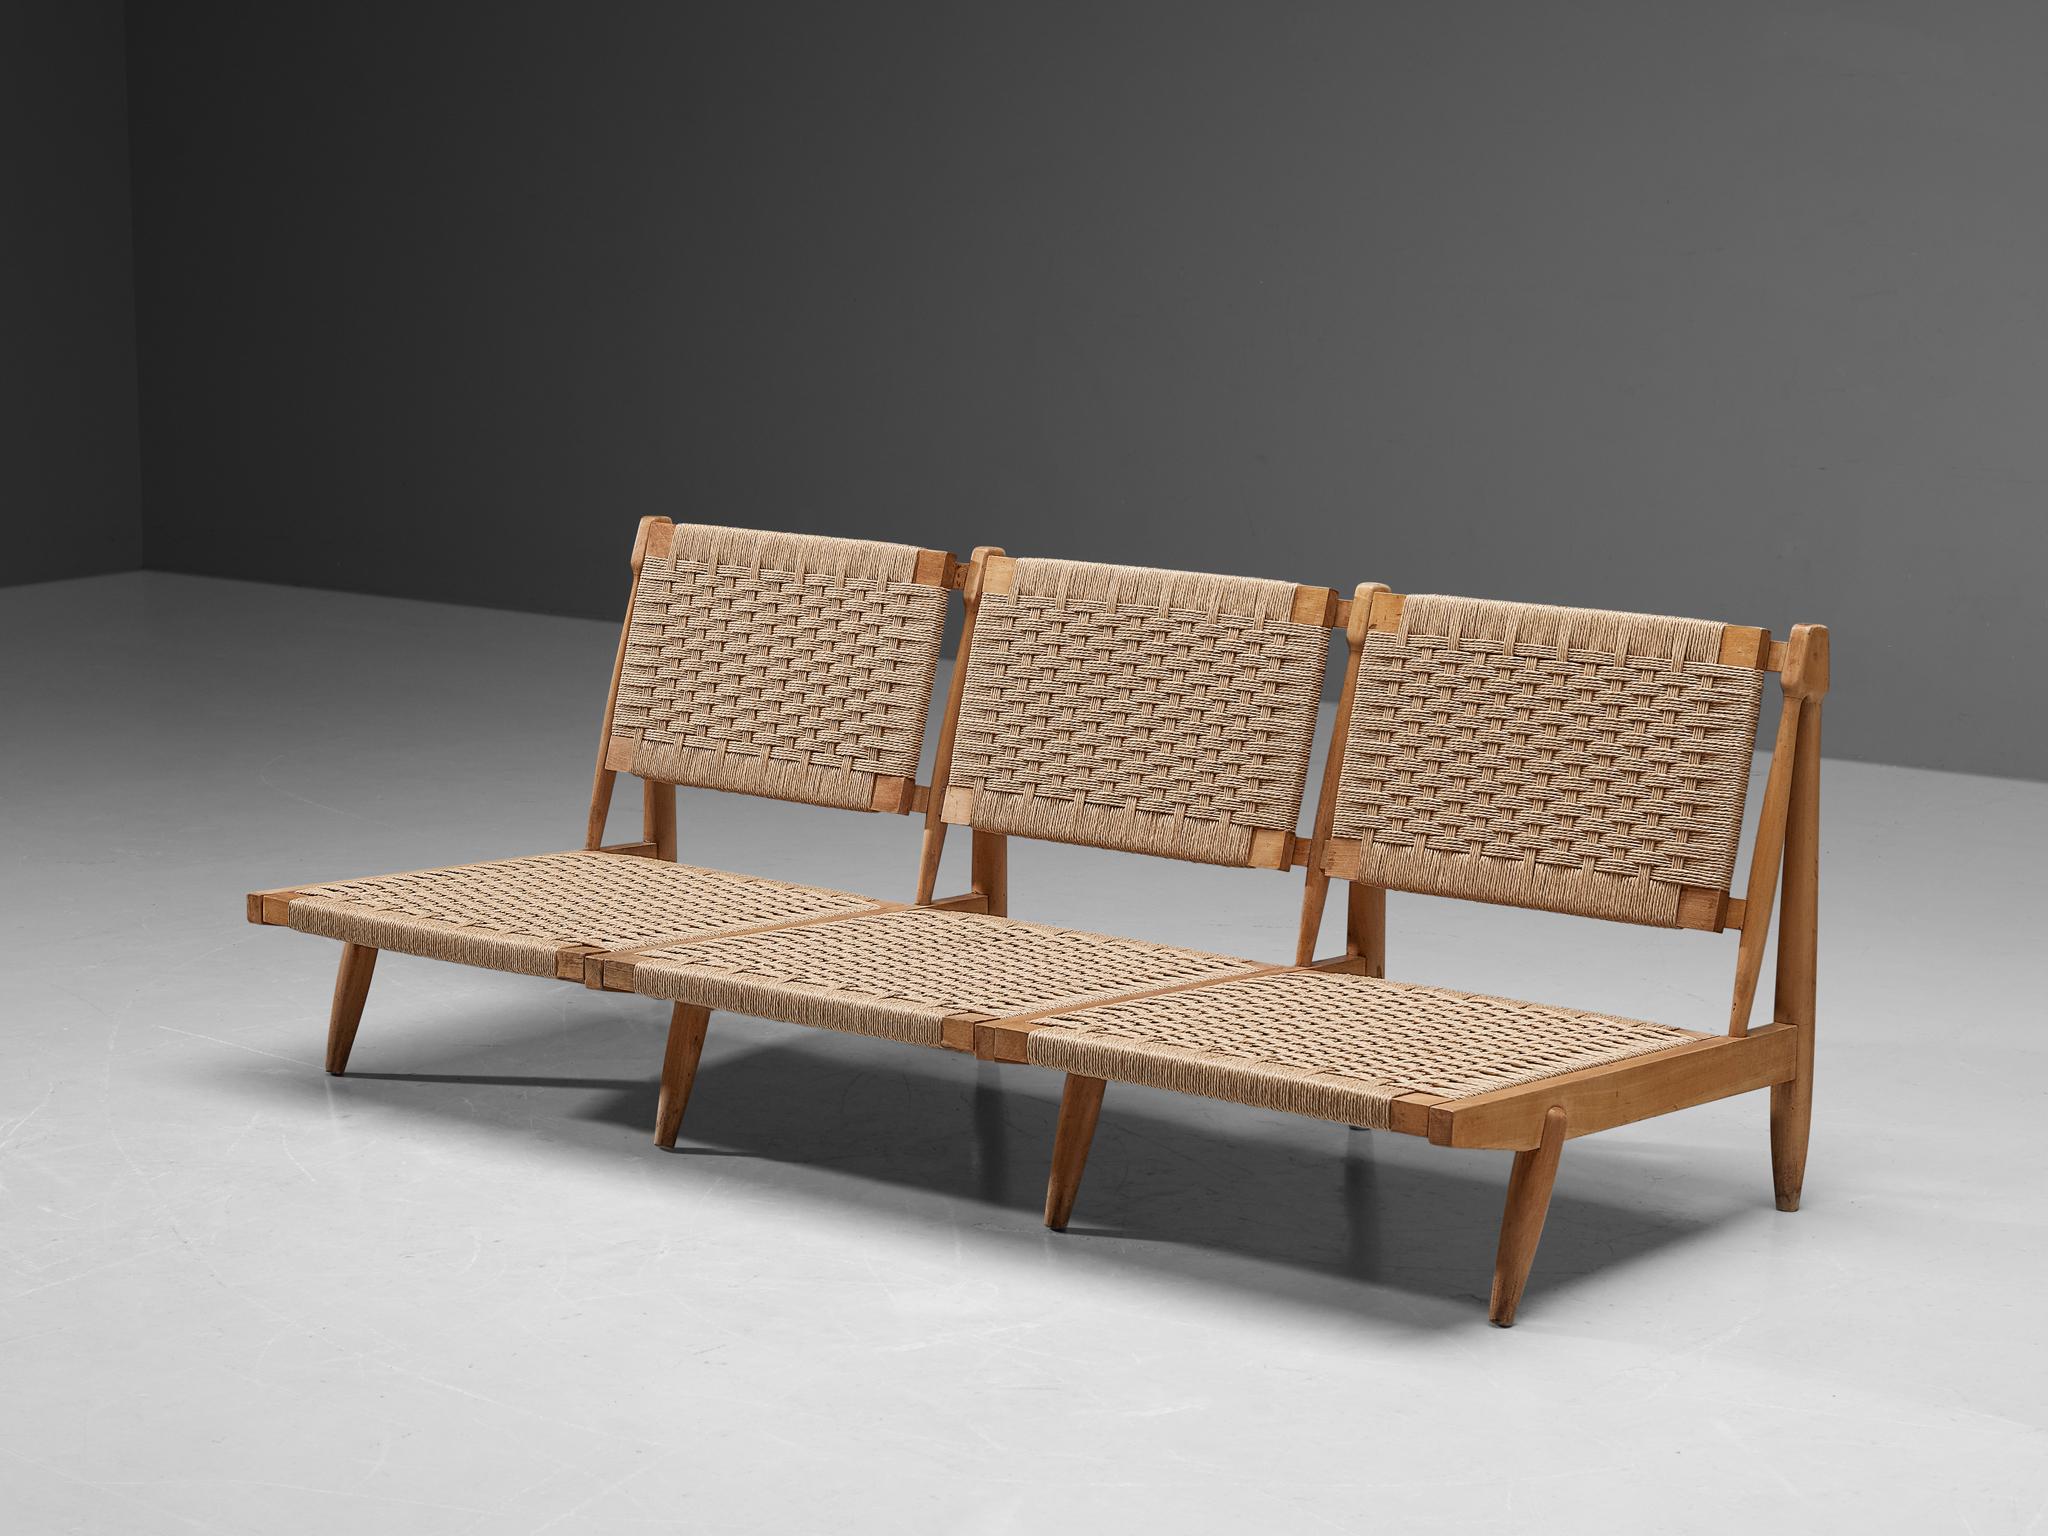 Bench or sofa, straw, beech, Spain, 1960s. 

This sofa or bench is designed with a woven straw backrest and seat that is in good condition. The front legs of the sofa are pointed outwards and feature interesting cylindrical lines. The beech frame